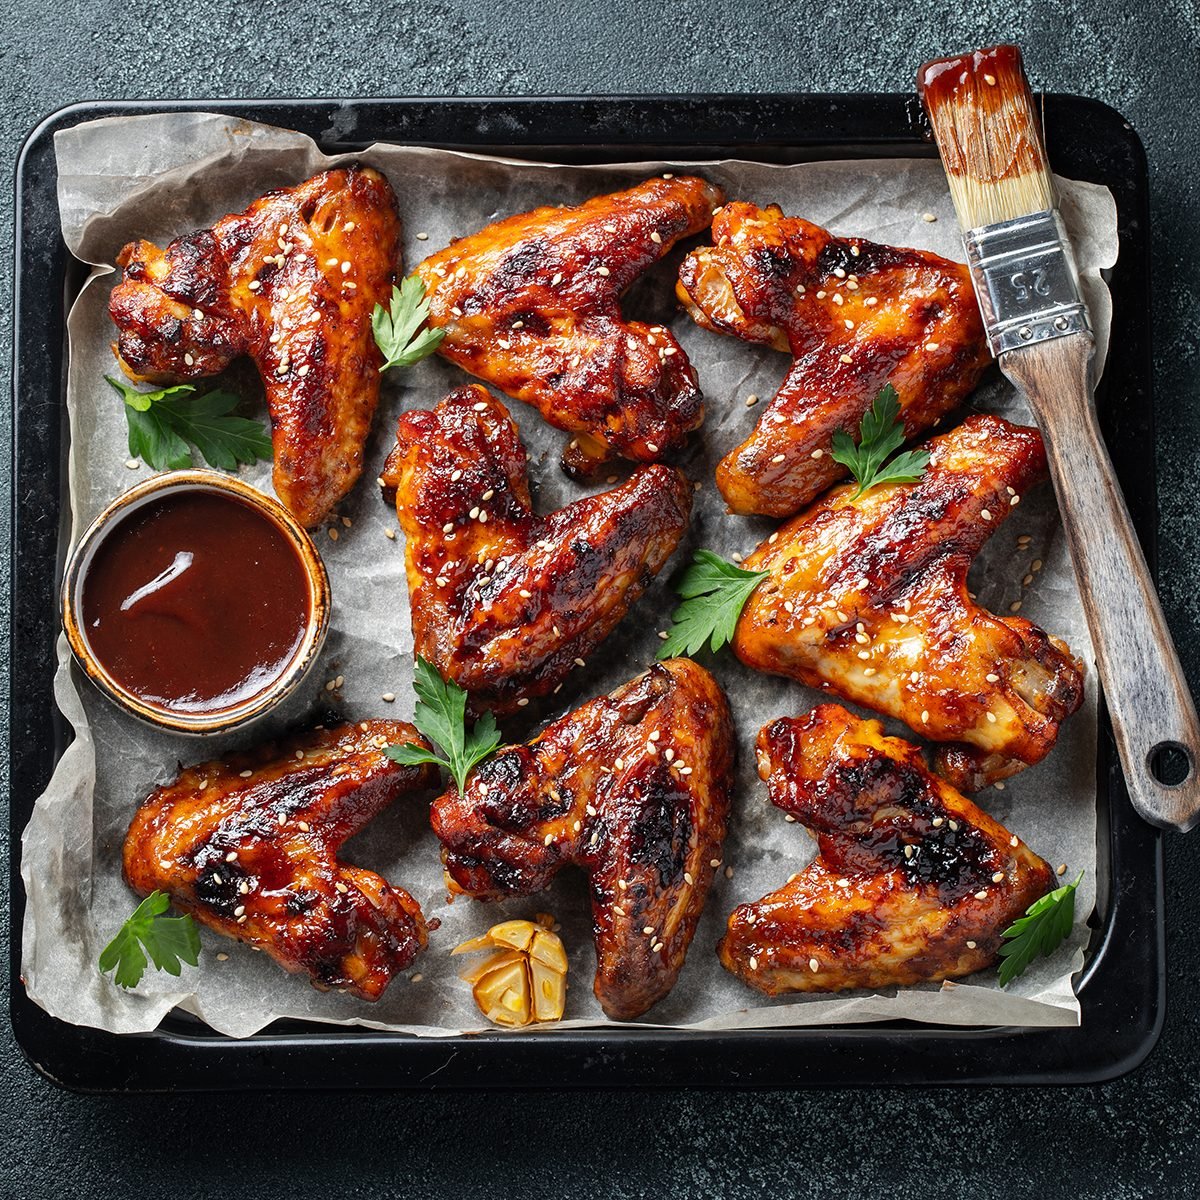 Roasted chicken wings in barbecue sauce with sesame seeds and parsley in a baking tray on a dark table.